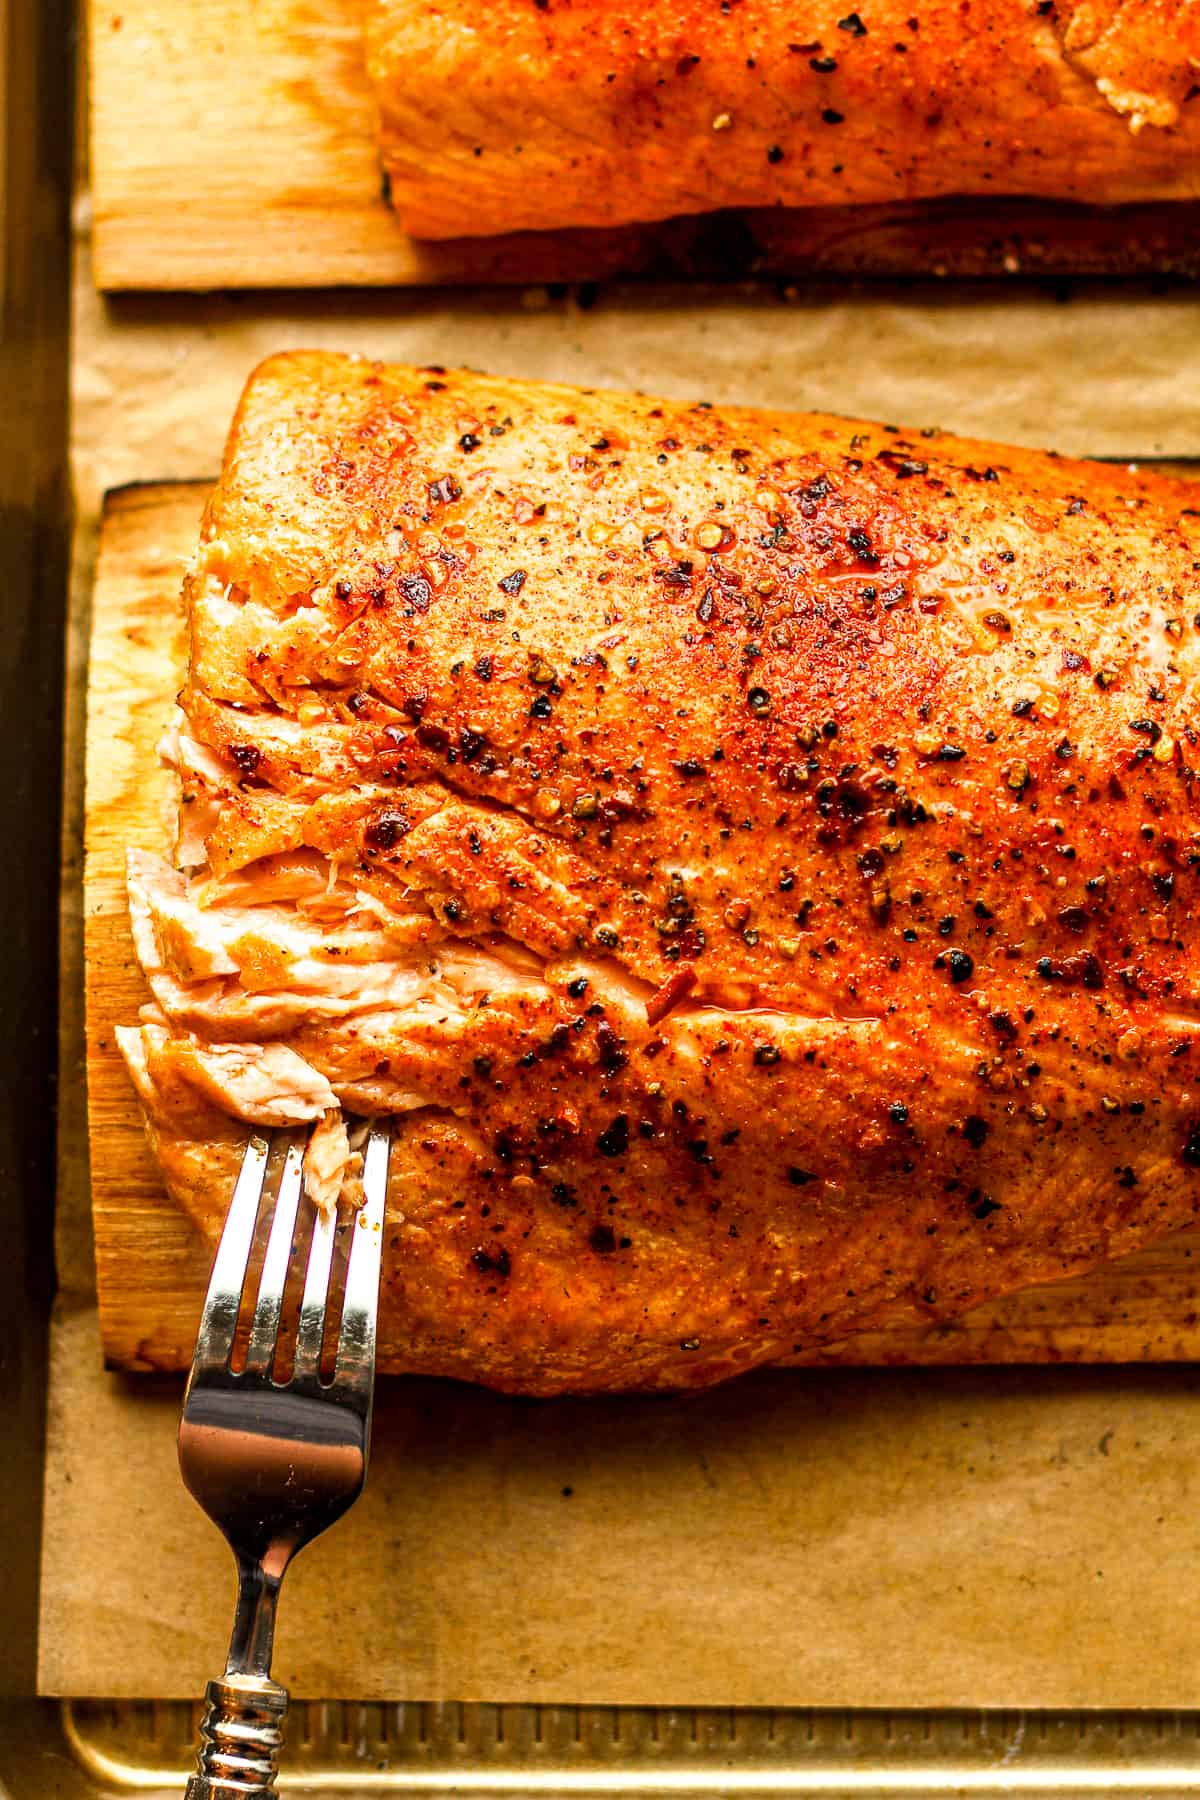 Closeup on a piece of grilled salmon.